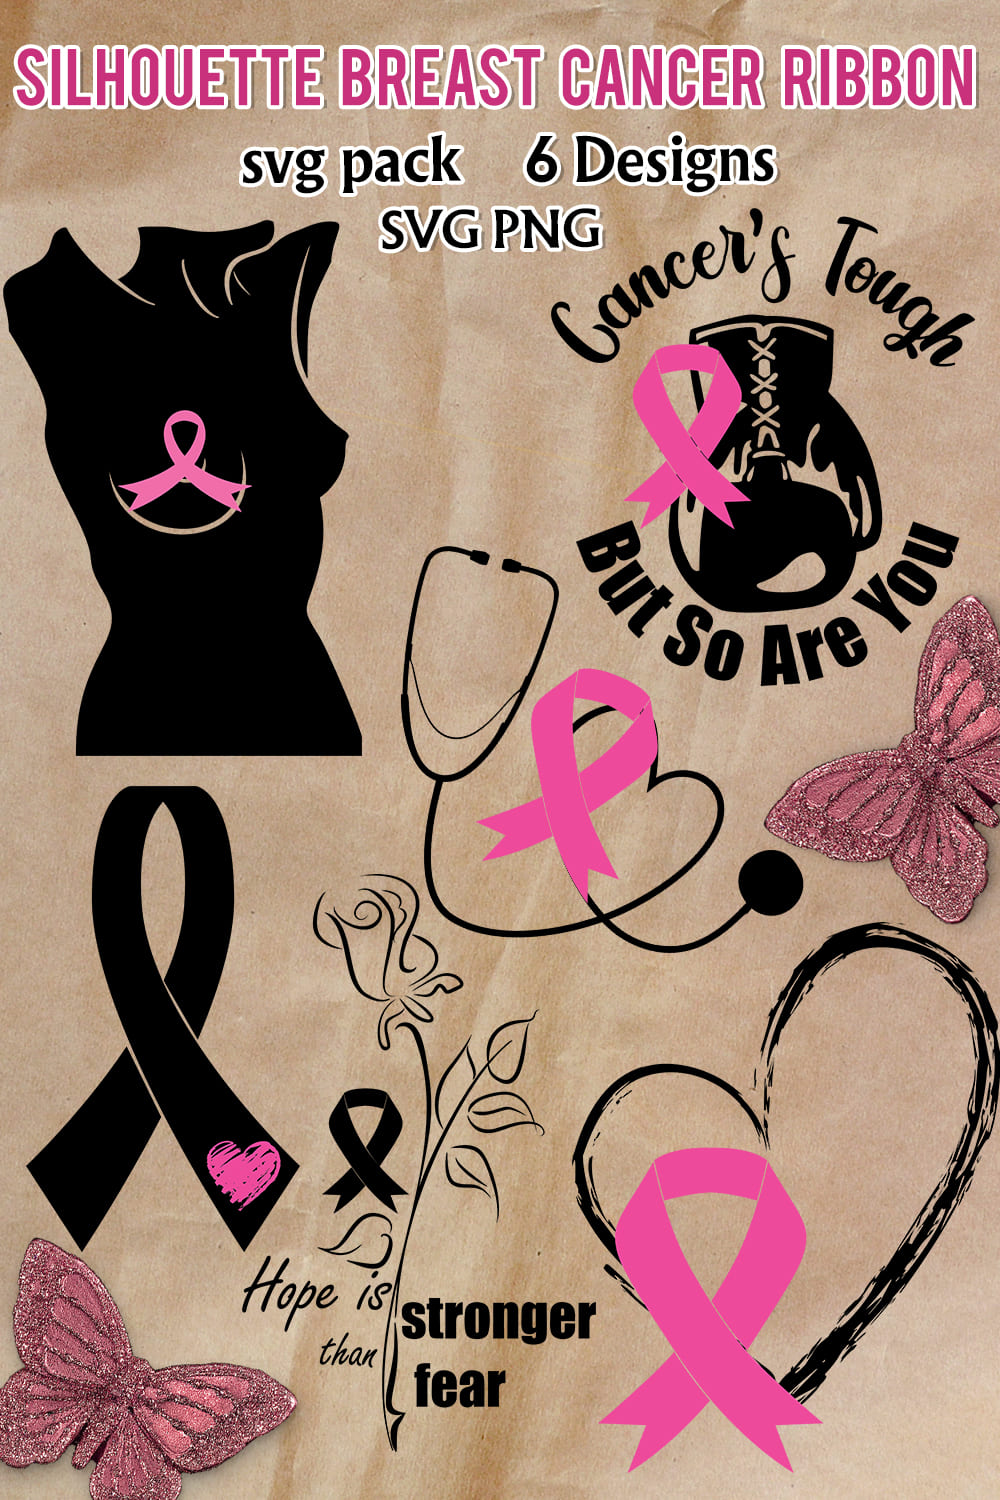 Various of silhouette breast cancer ribbons.